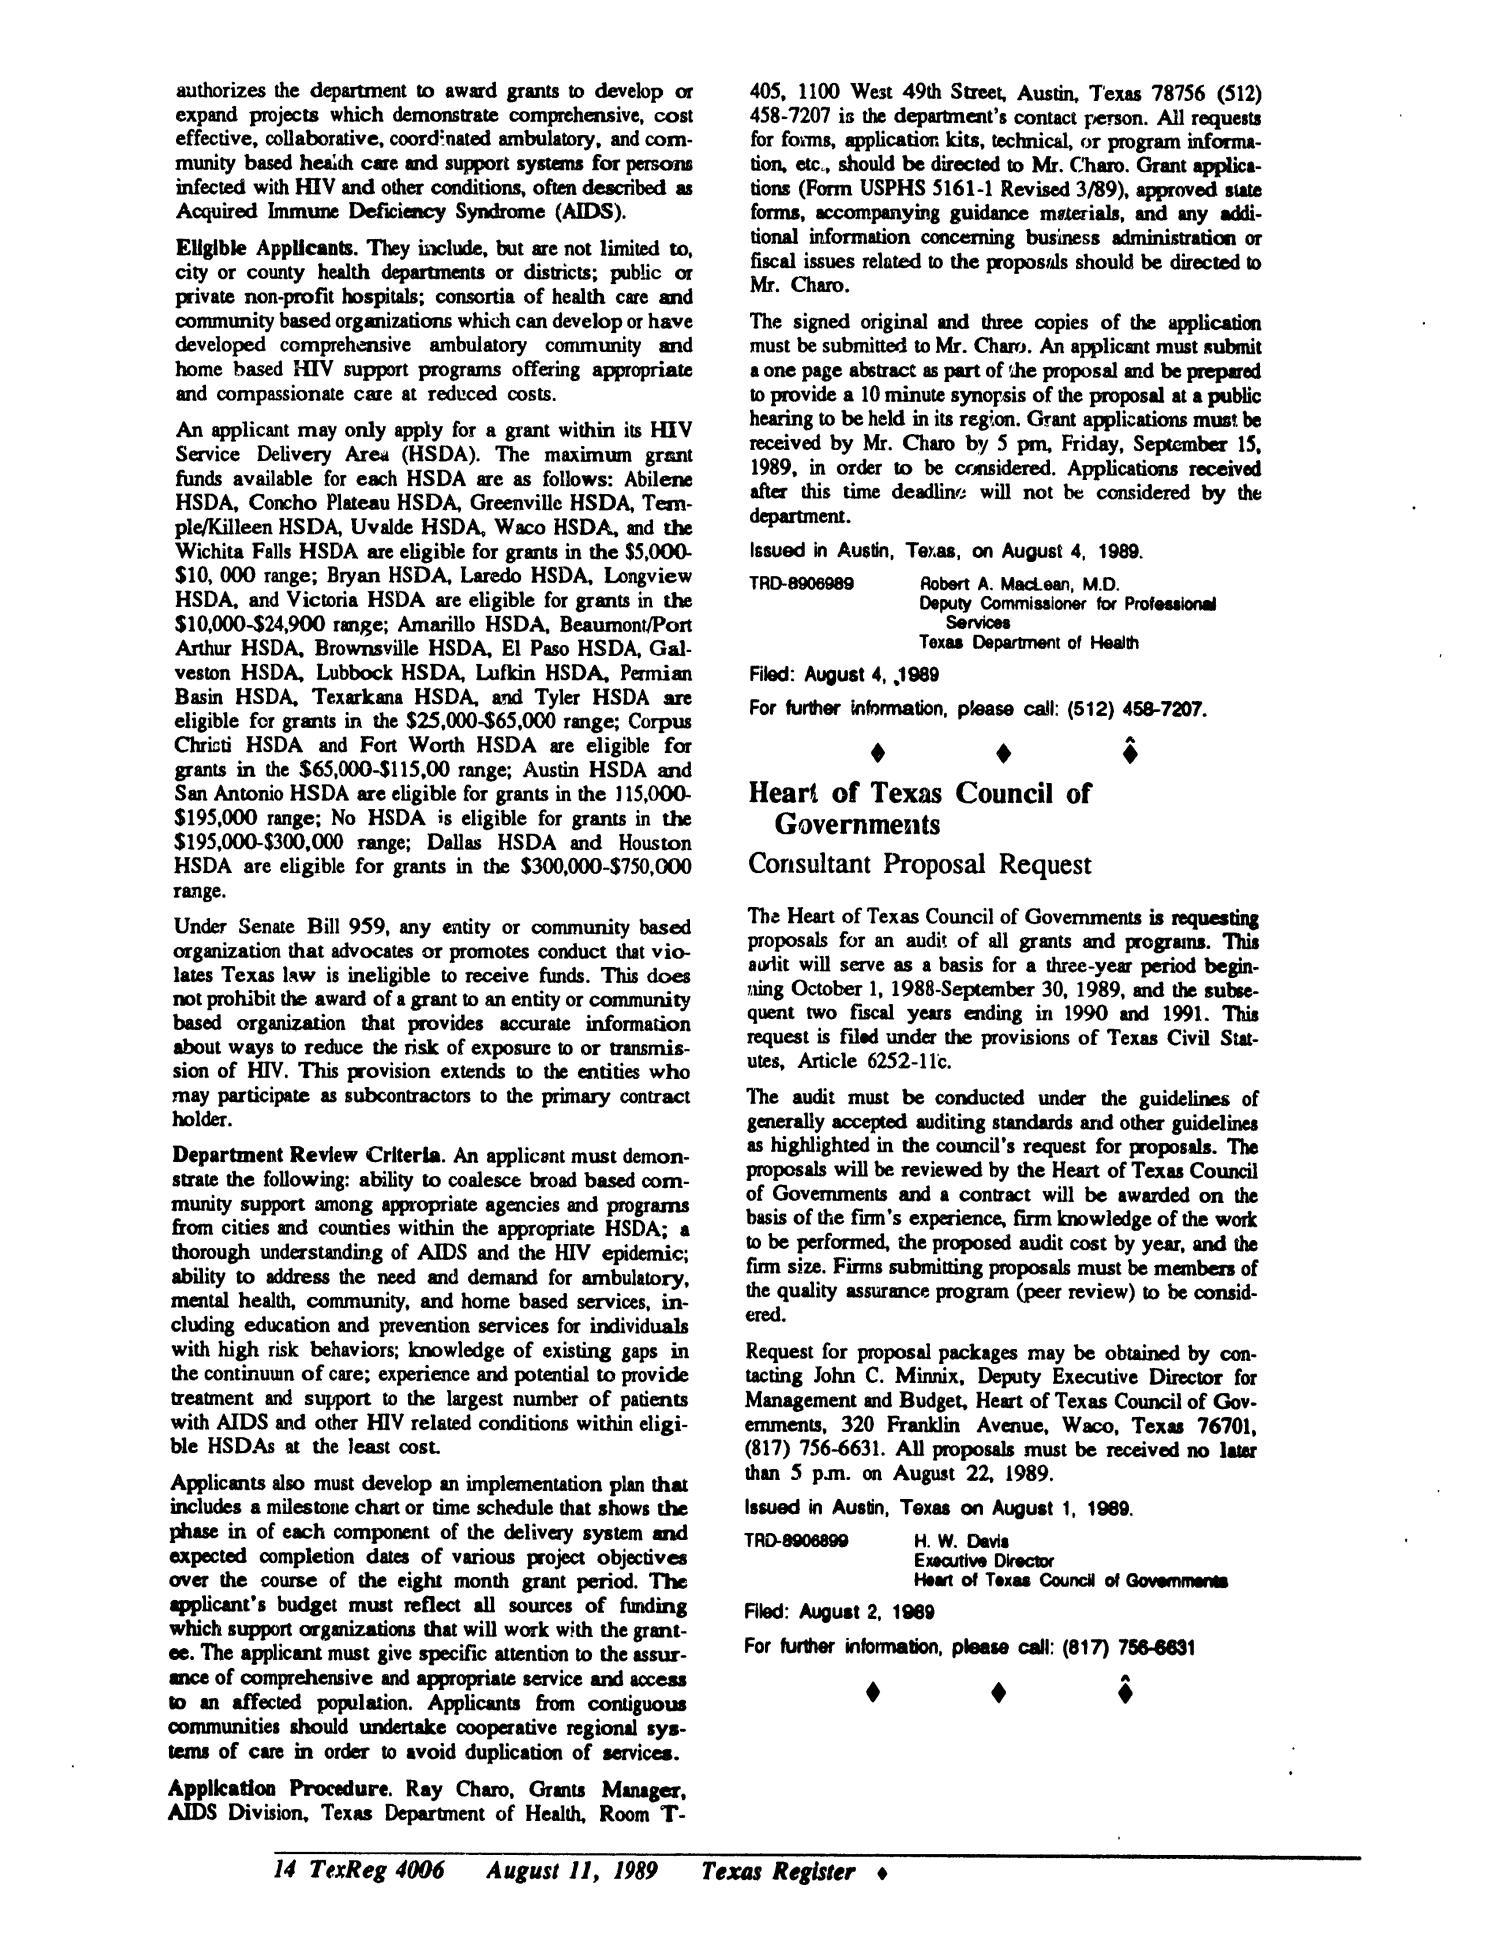 Texas Register, Volume 14, Number 58, Pages 3953-4016, August 11, 1989
                                                
                                                    4006
                                                